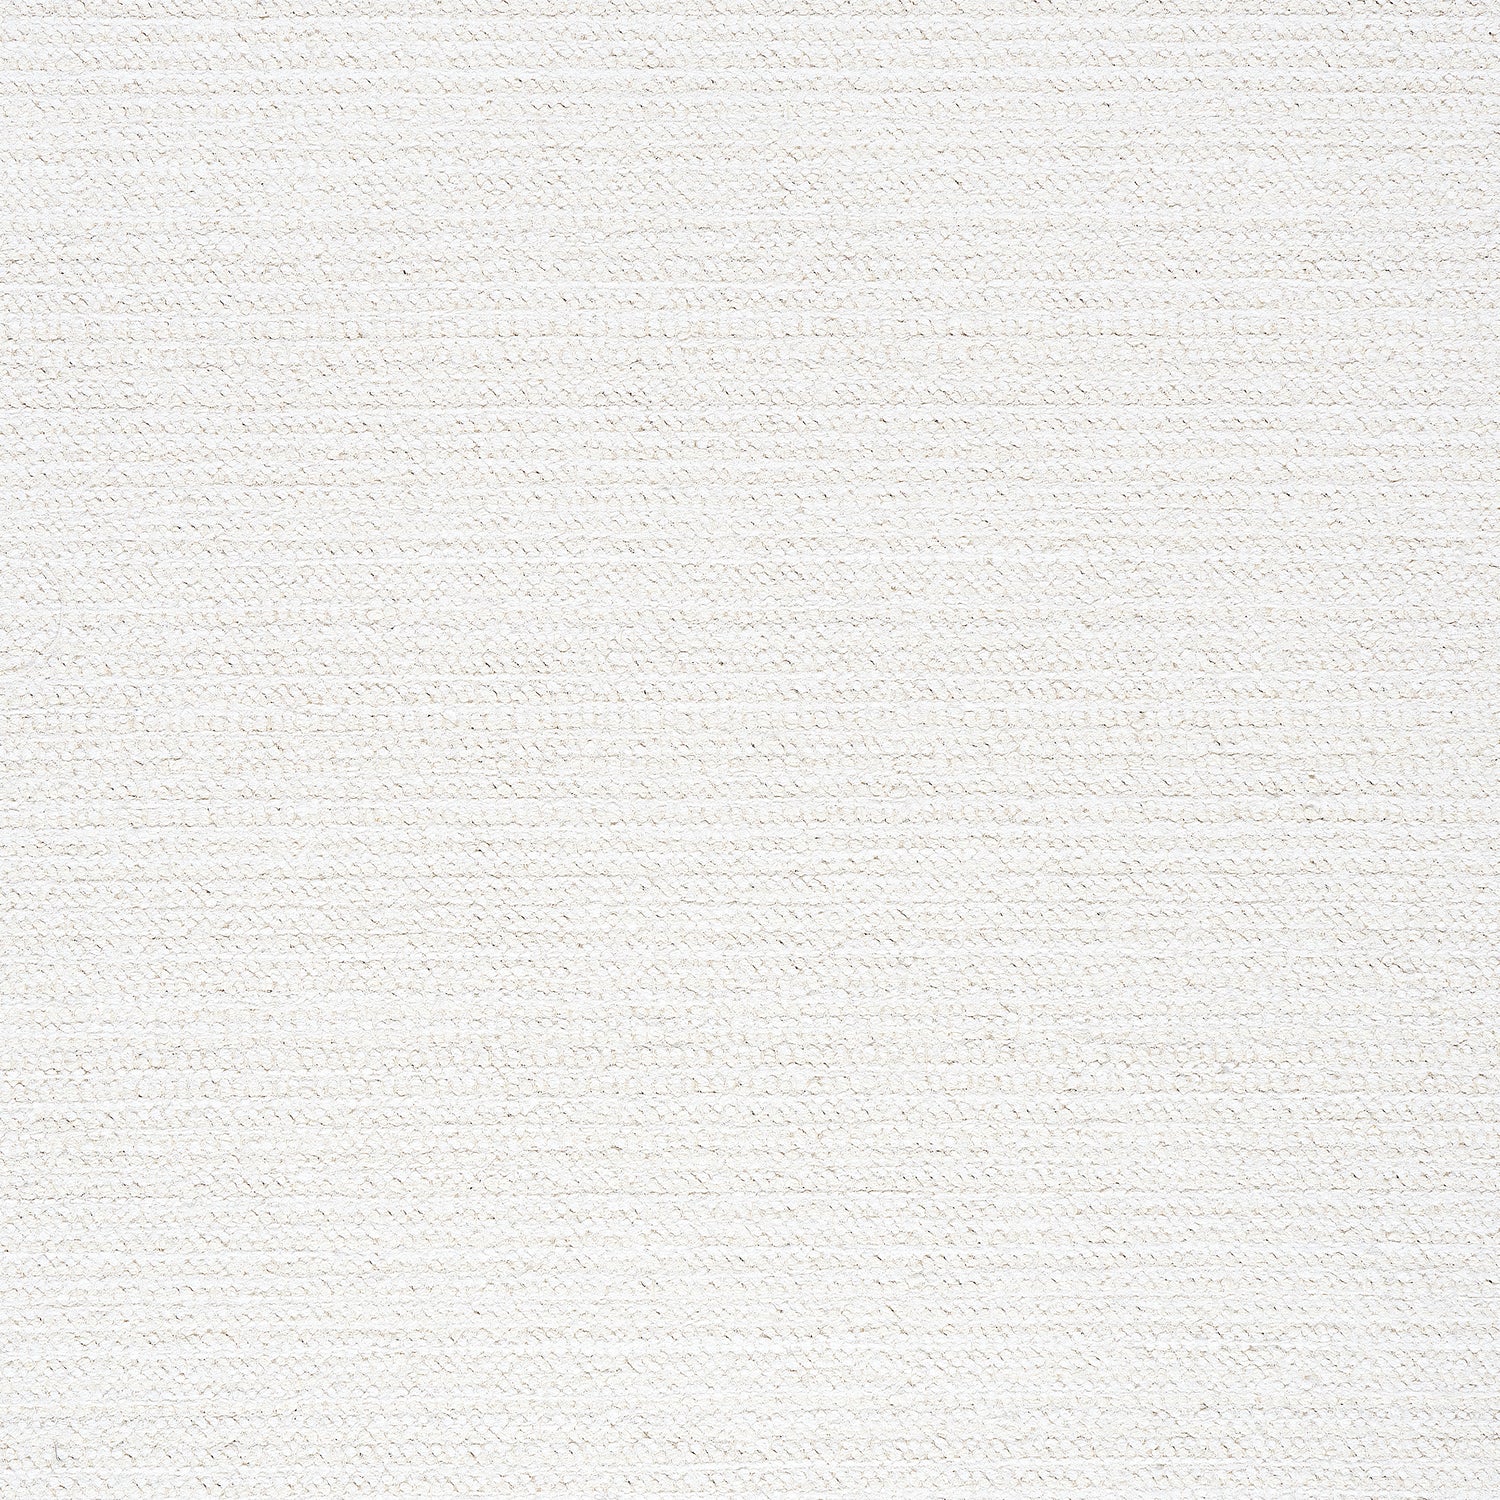 Strata fabric in bone color - pattern number W78343 - by Thibaut in the  Sierra collection